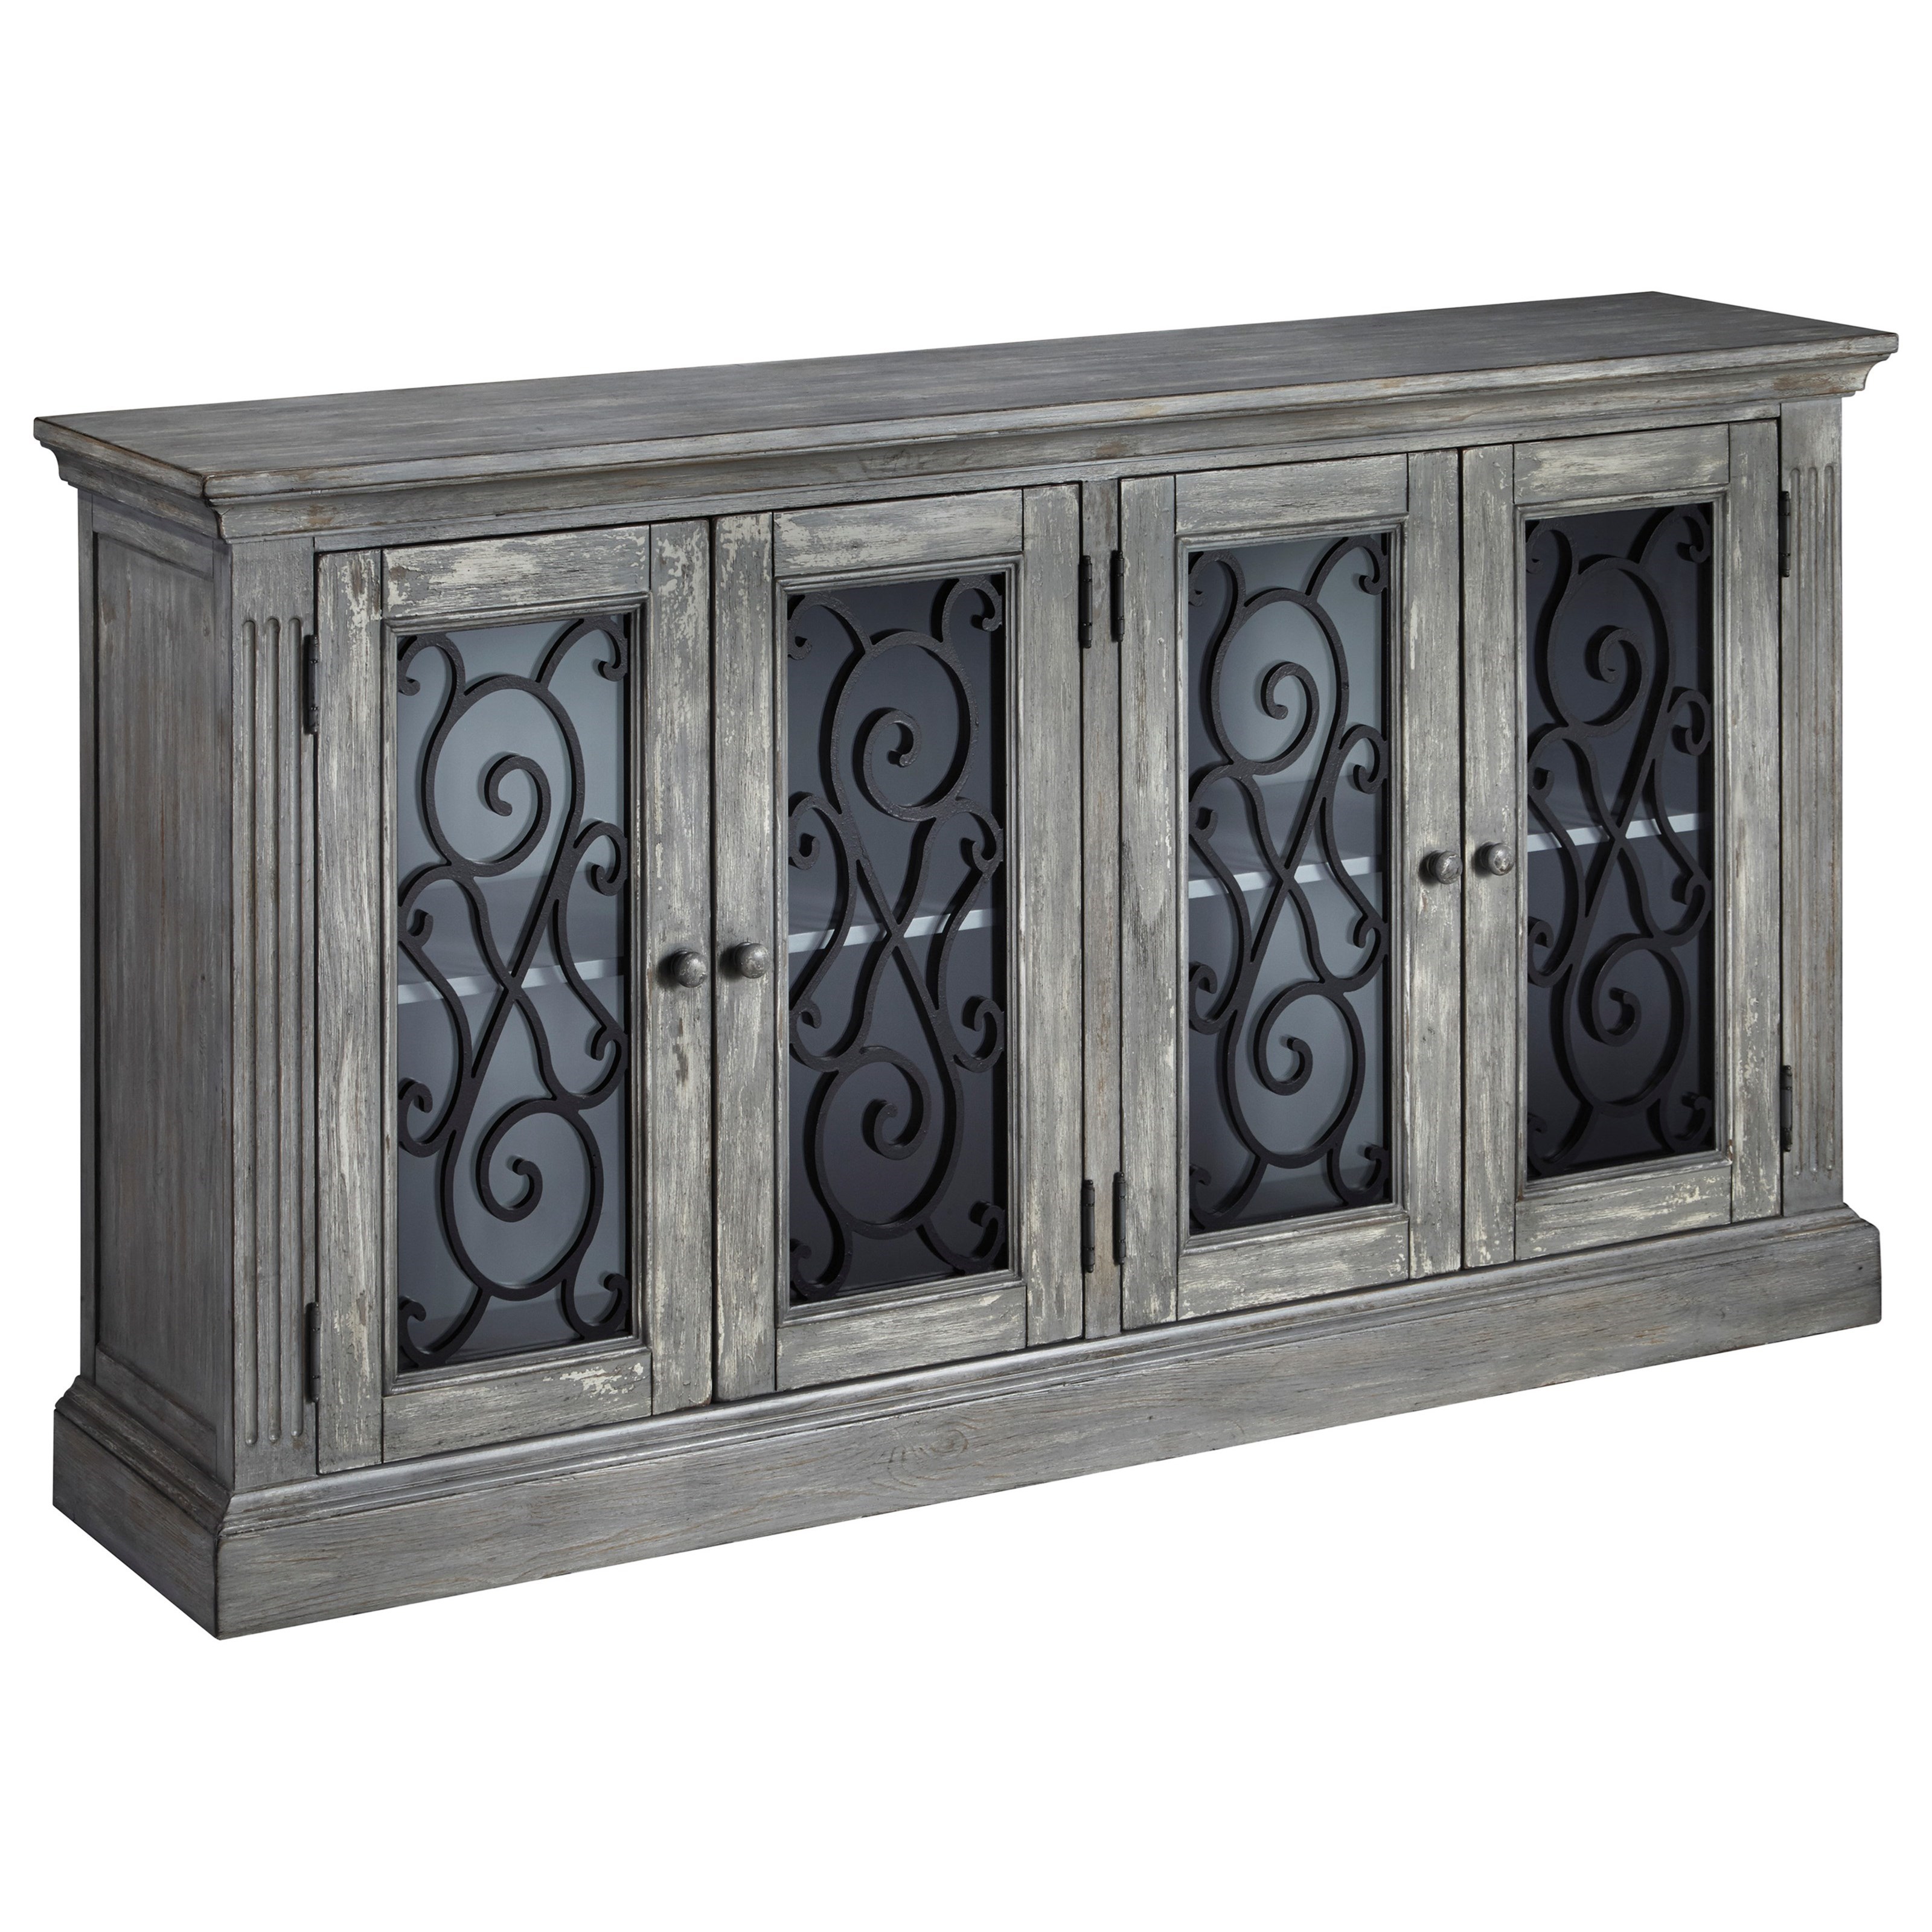 door accent cabinet antique gray finish decorative grilles products signature design ashley color cottage accents table with doors glass black leather dining room chairs designer